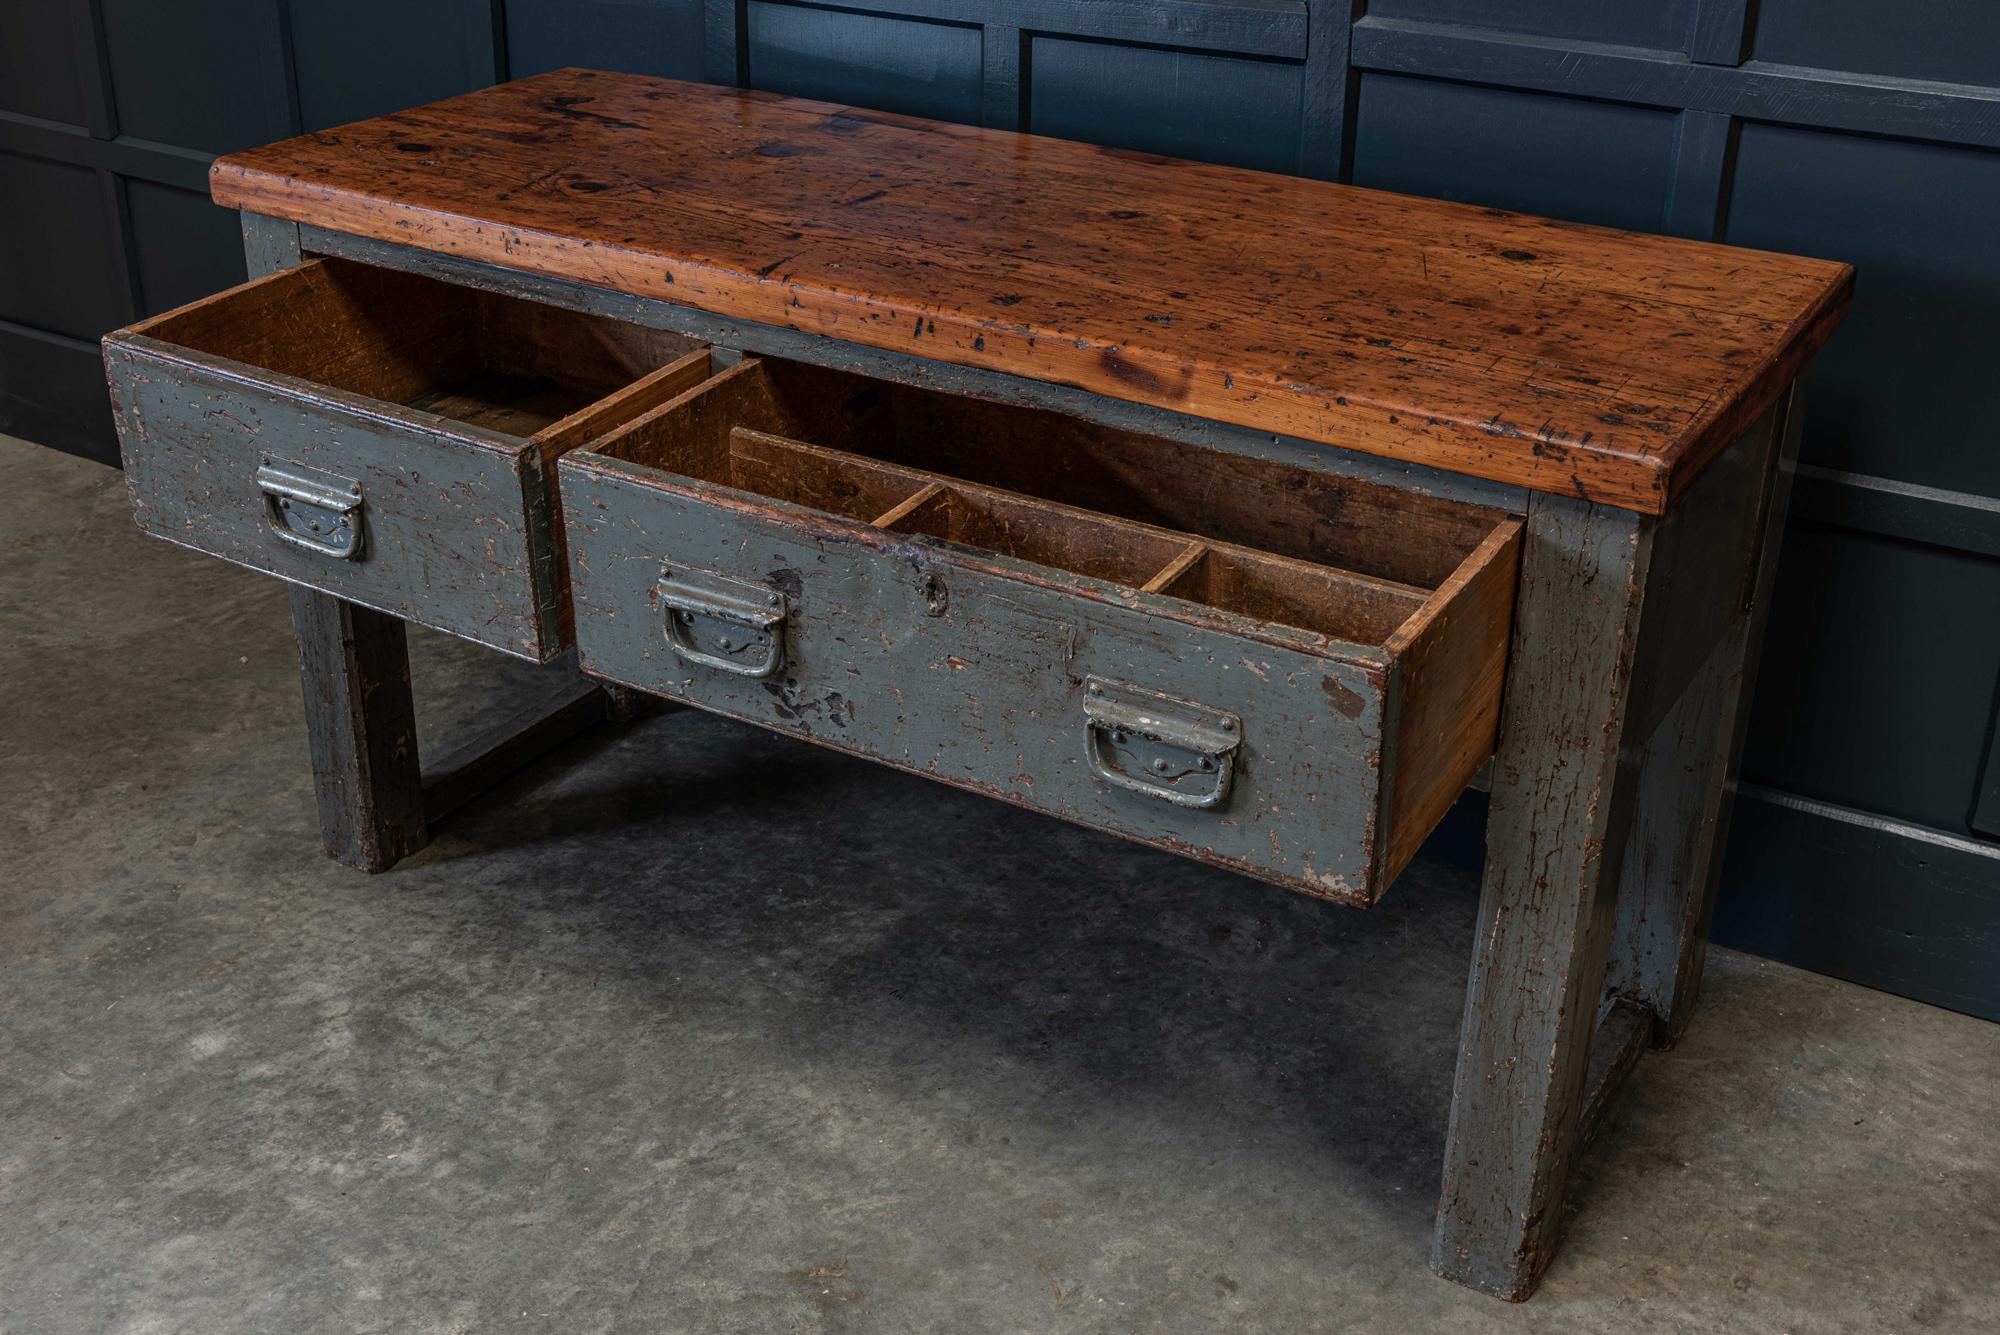 Grey painted workshop table or counter,
circa 1910.

Grey painted workshop table or counter with great color, scale and patina with original iron drawer pulls.
Ideal as a prep table or console or side table.

Measures: W 155 x H 84 x D 59 cm.